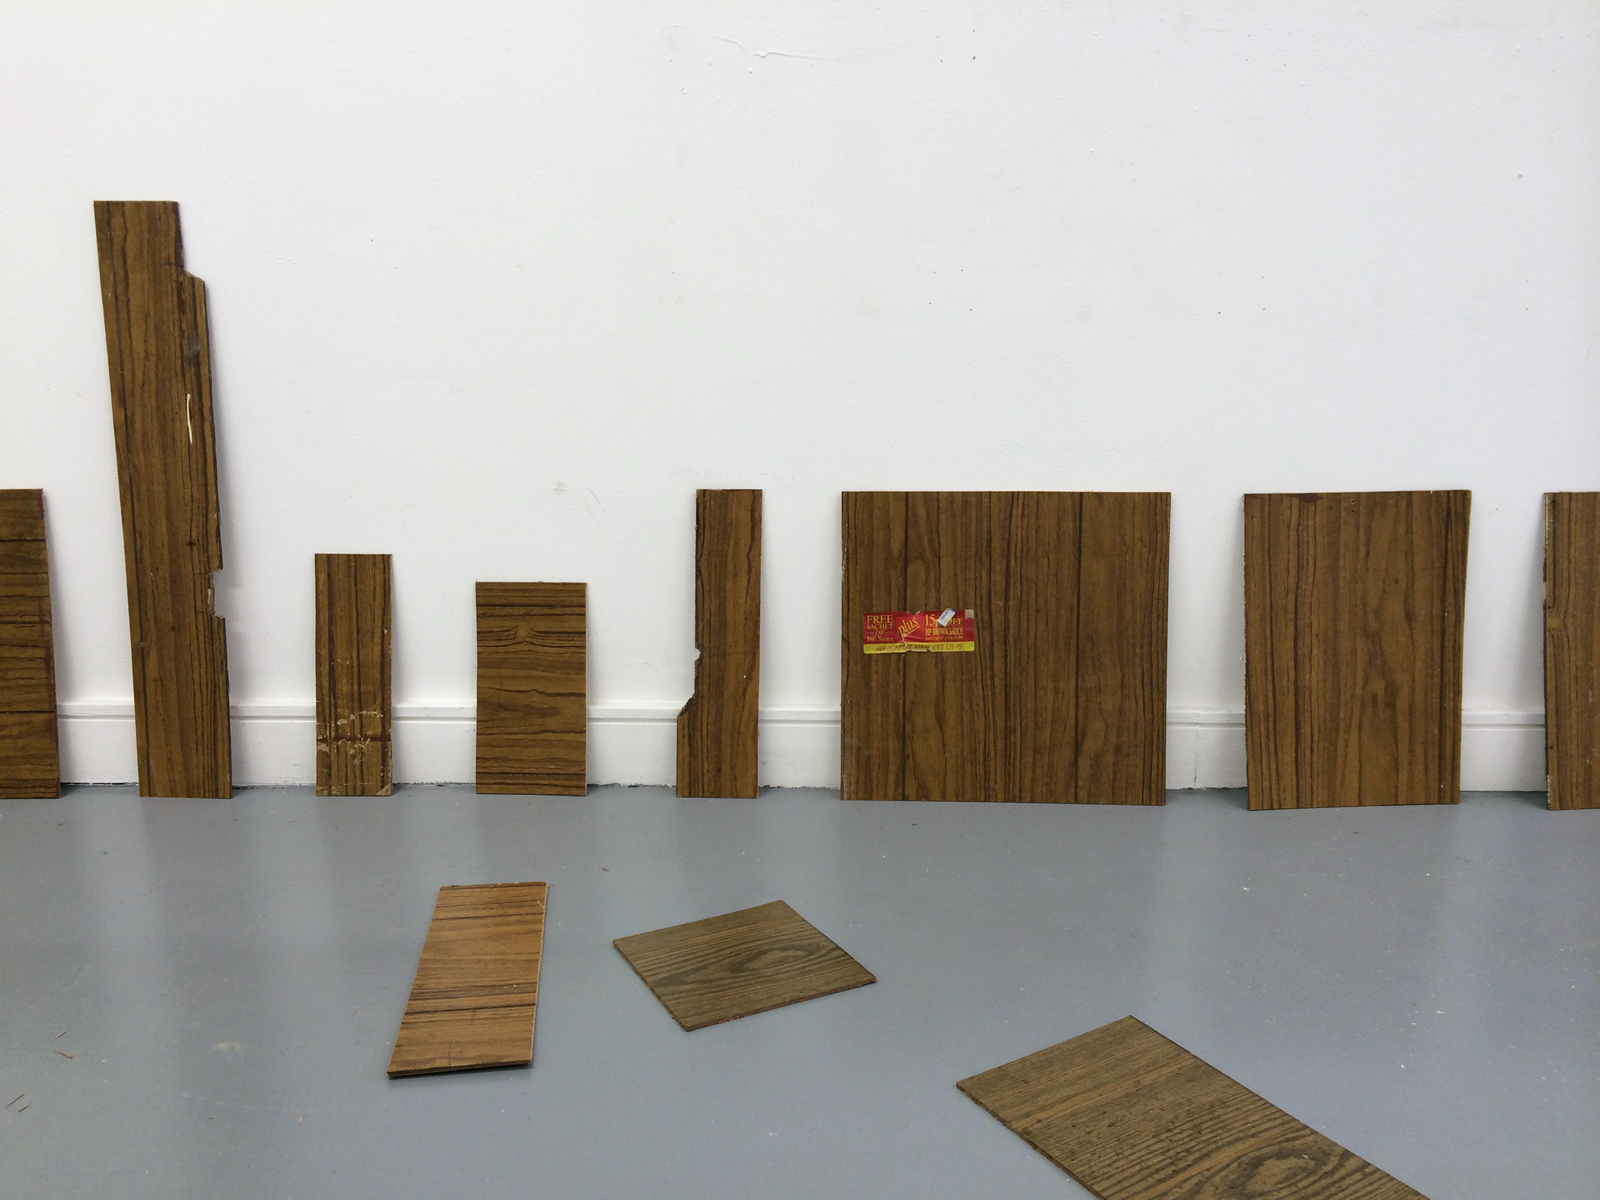 11 wood panel pieces of various shapes leaning against a wall and on the floor.